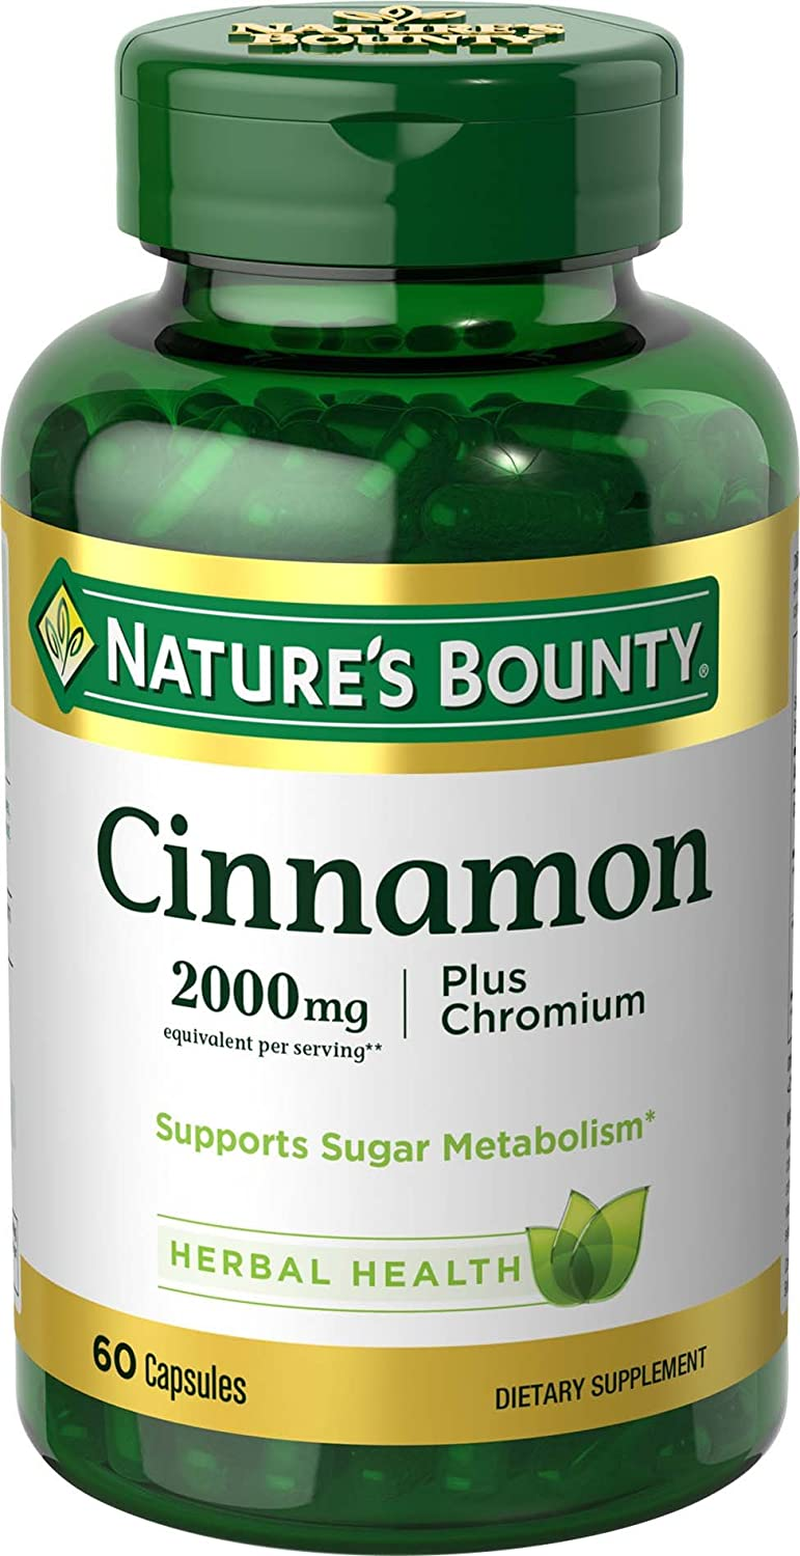 Nature S Bounty Cinnamon Pills and Chromium Herbal Health Supplement, Promotes Sugar Metabolism and Heart Health, 2000G, 60 Capsules